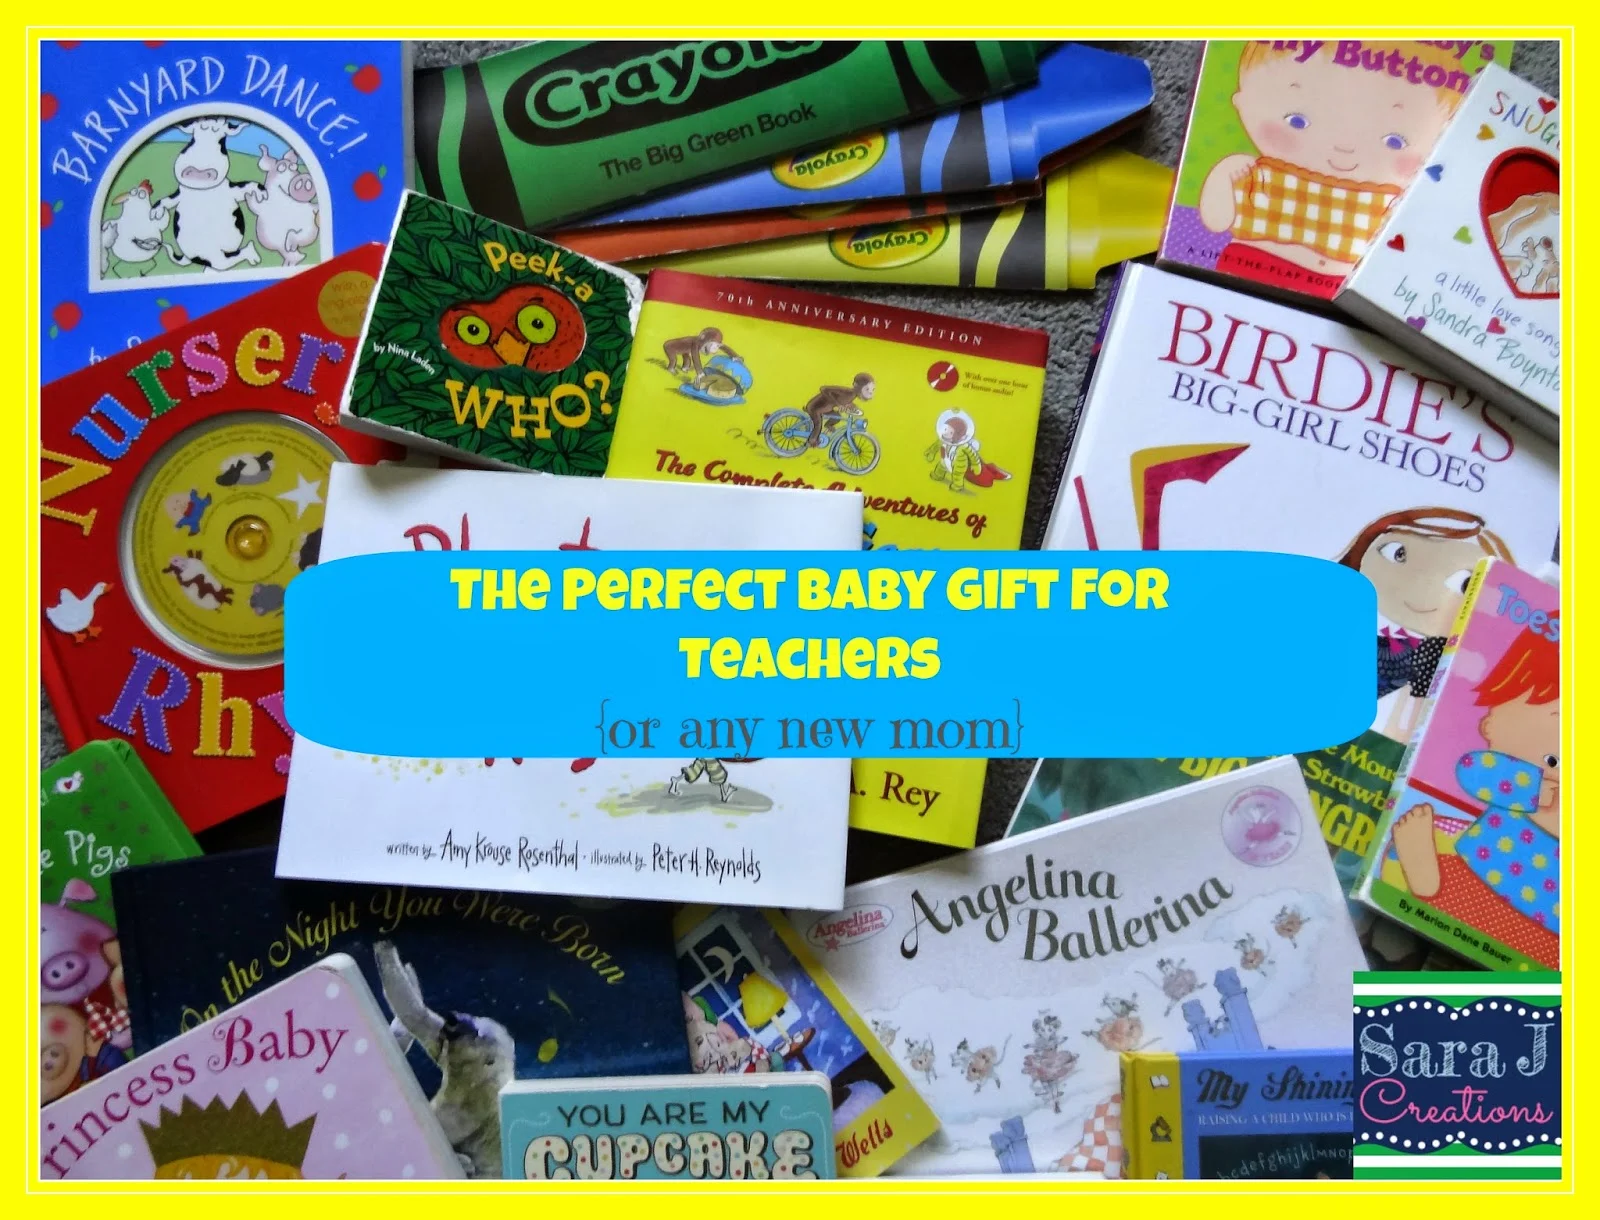 Giving books instead of cards makes the perfect collection for a new baby